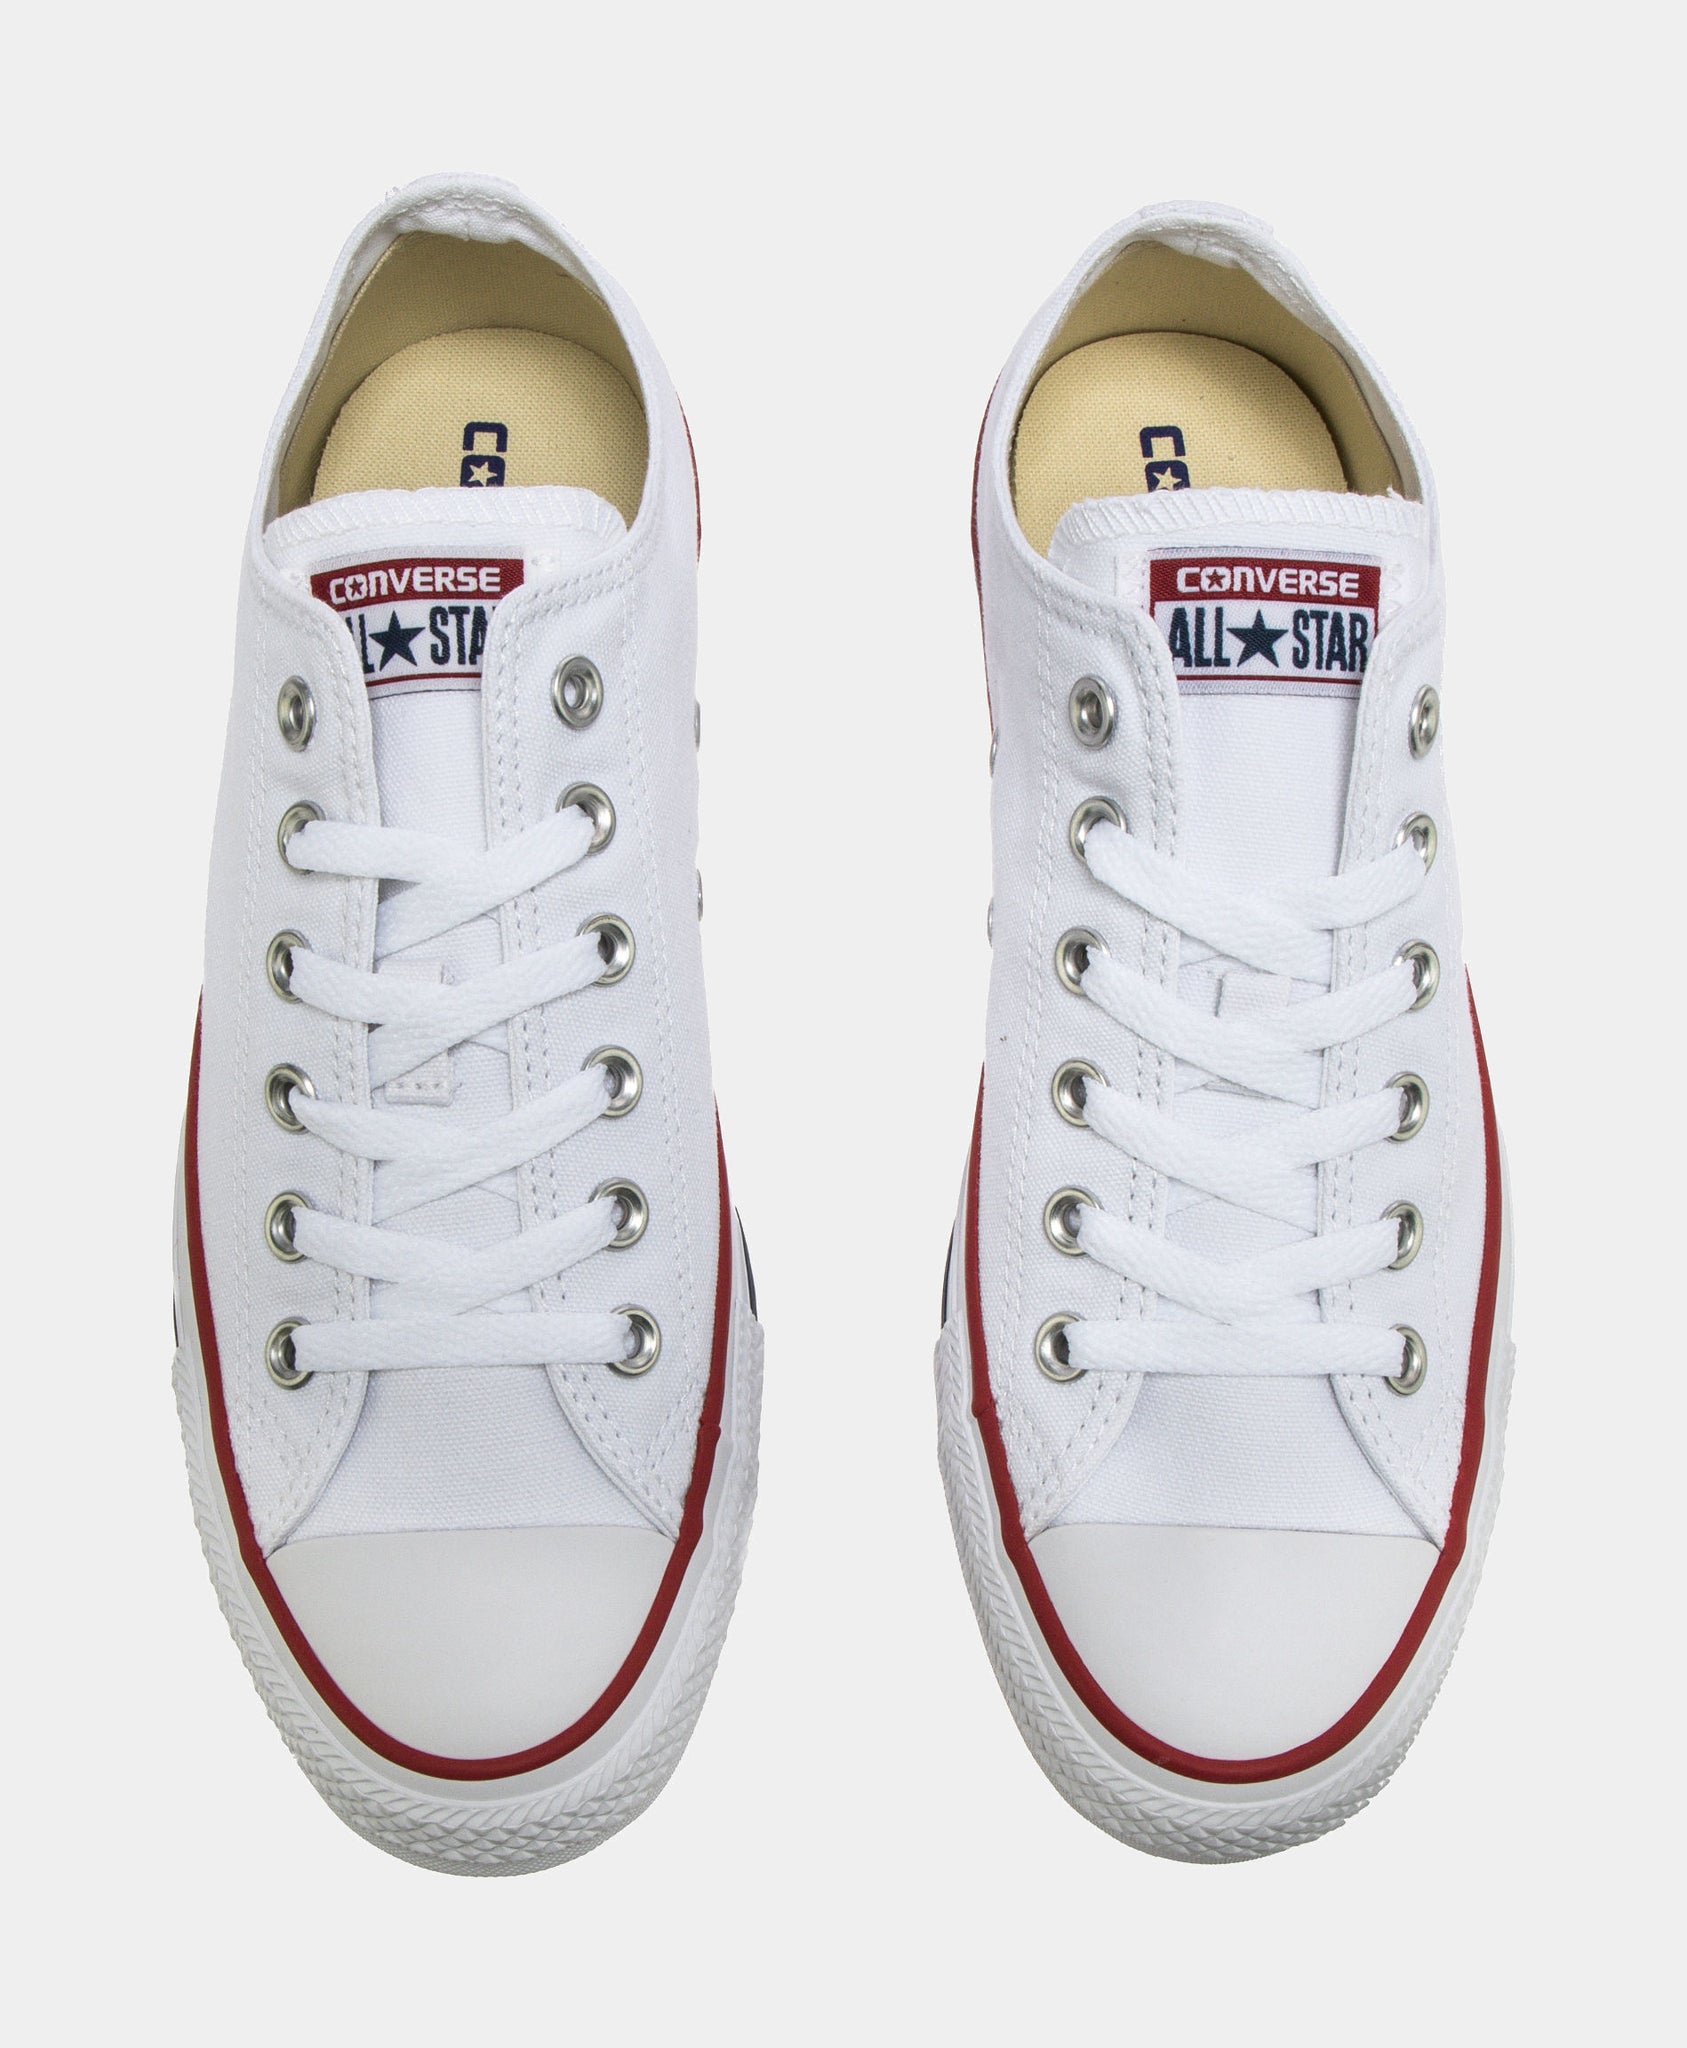 Converse Chuck Taylor All Star Classic Colors Low Solid Canvas Mens Lifestyle Optical White M7652 – Shoe Palace